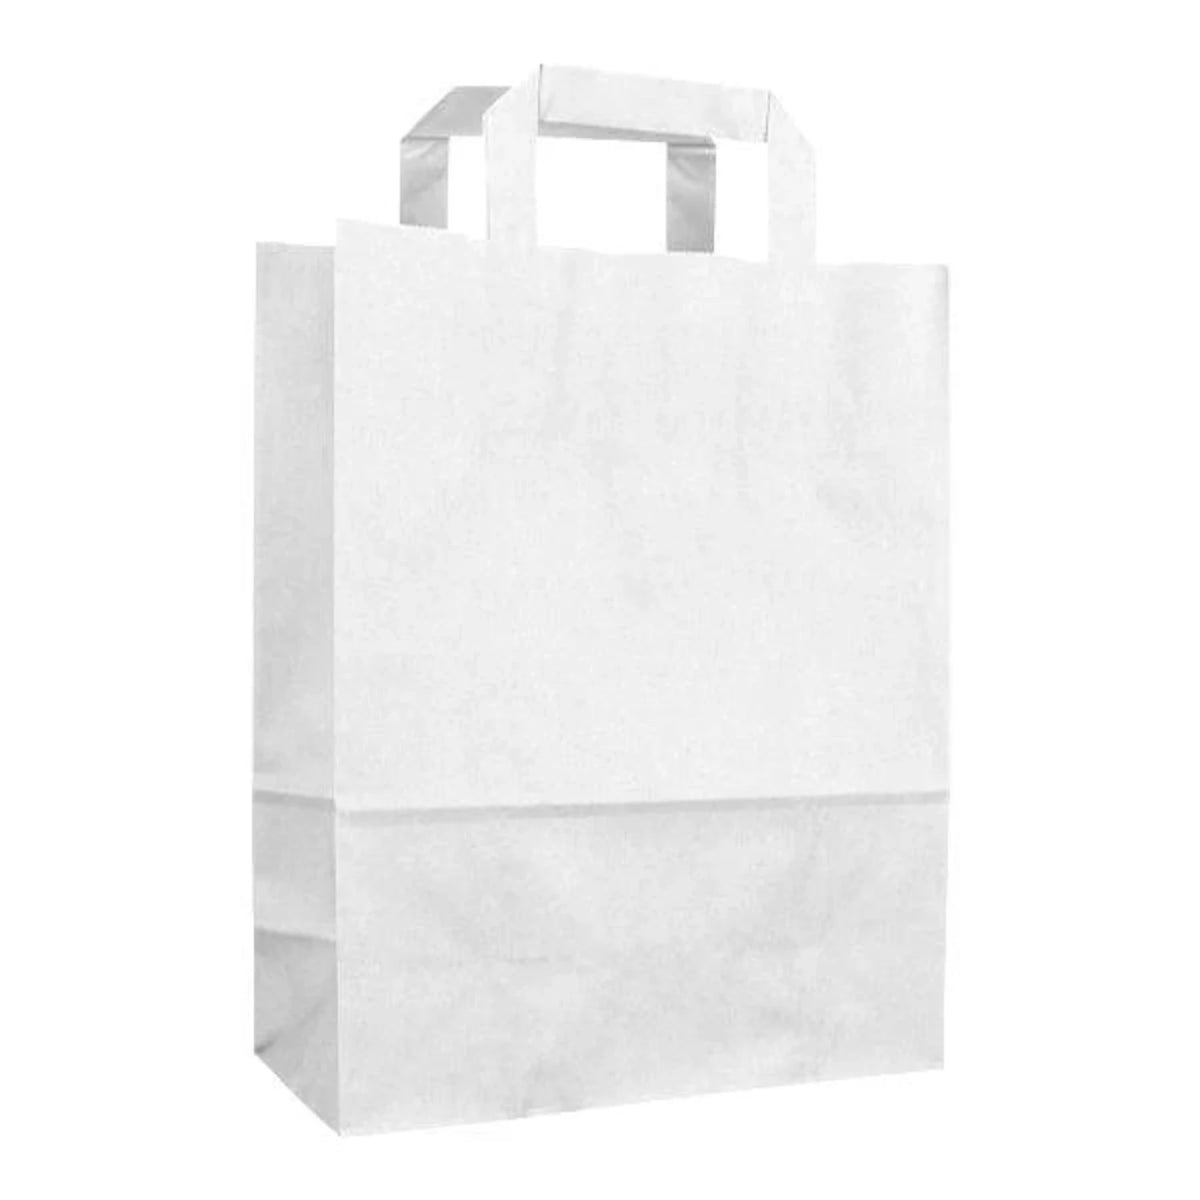 sos-white-bags-with-handles-large-250pk